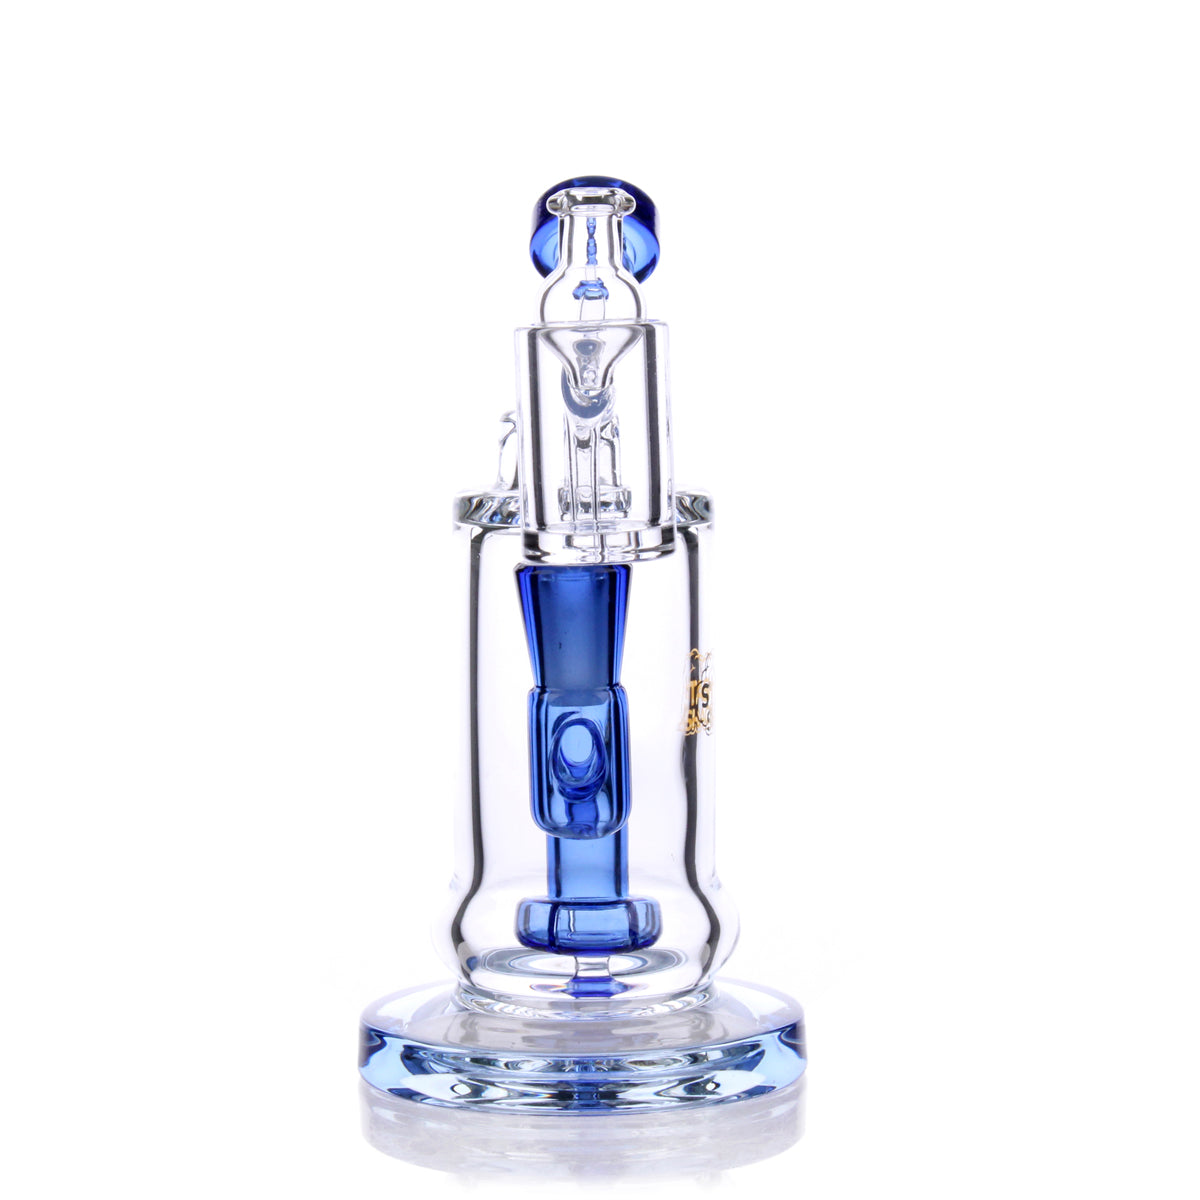 TerpDroid Mini Rig in blue borosilicate glass with showerhead percolator, front view on white background